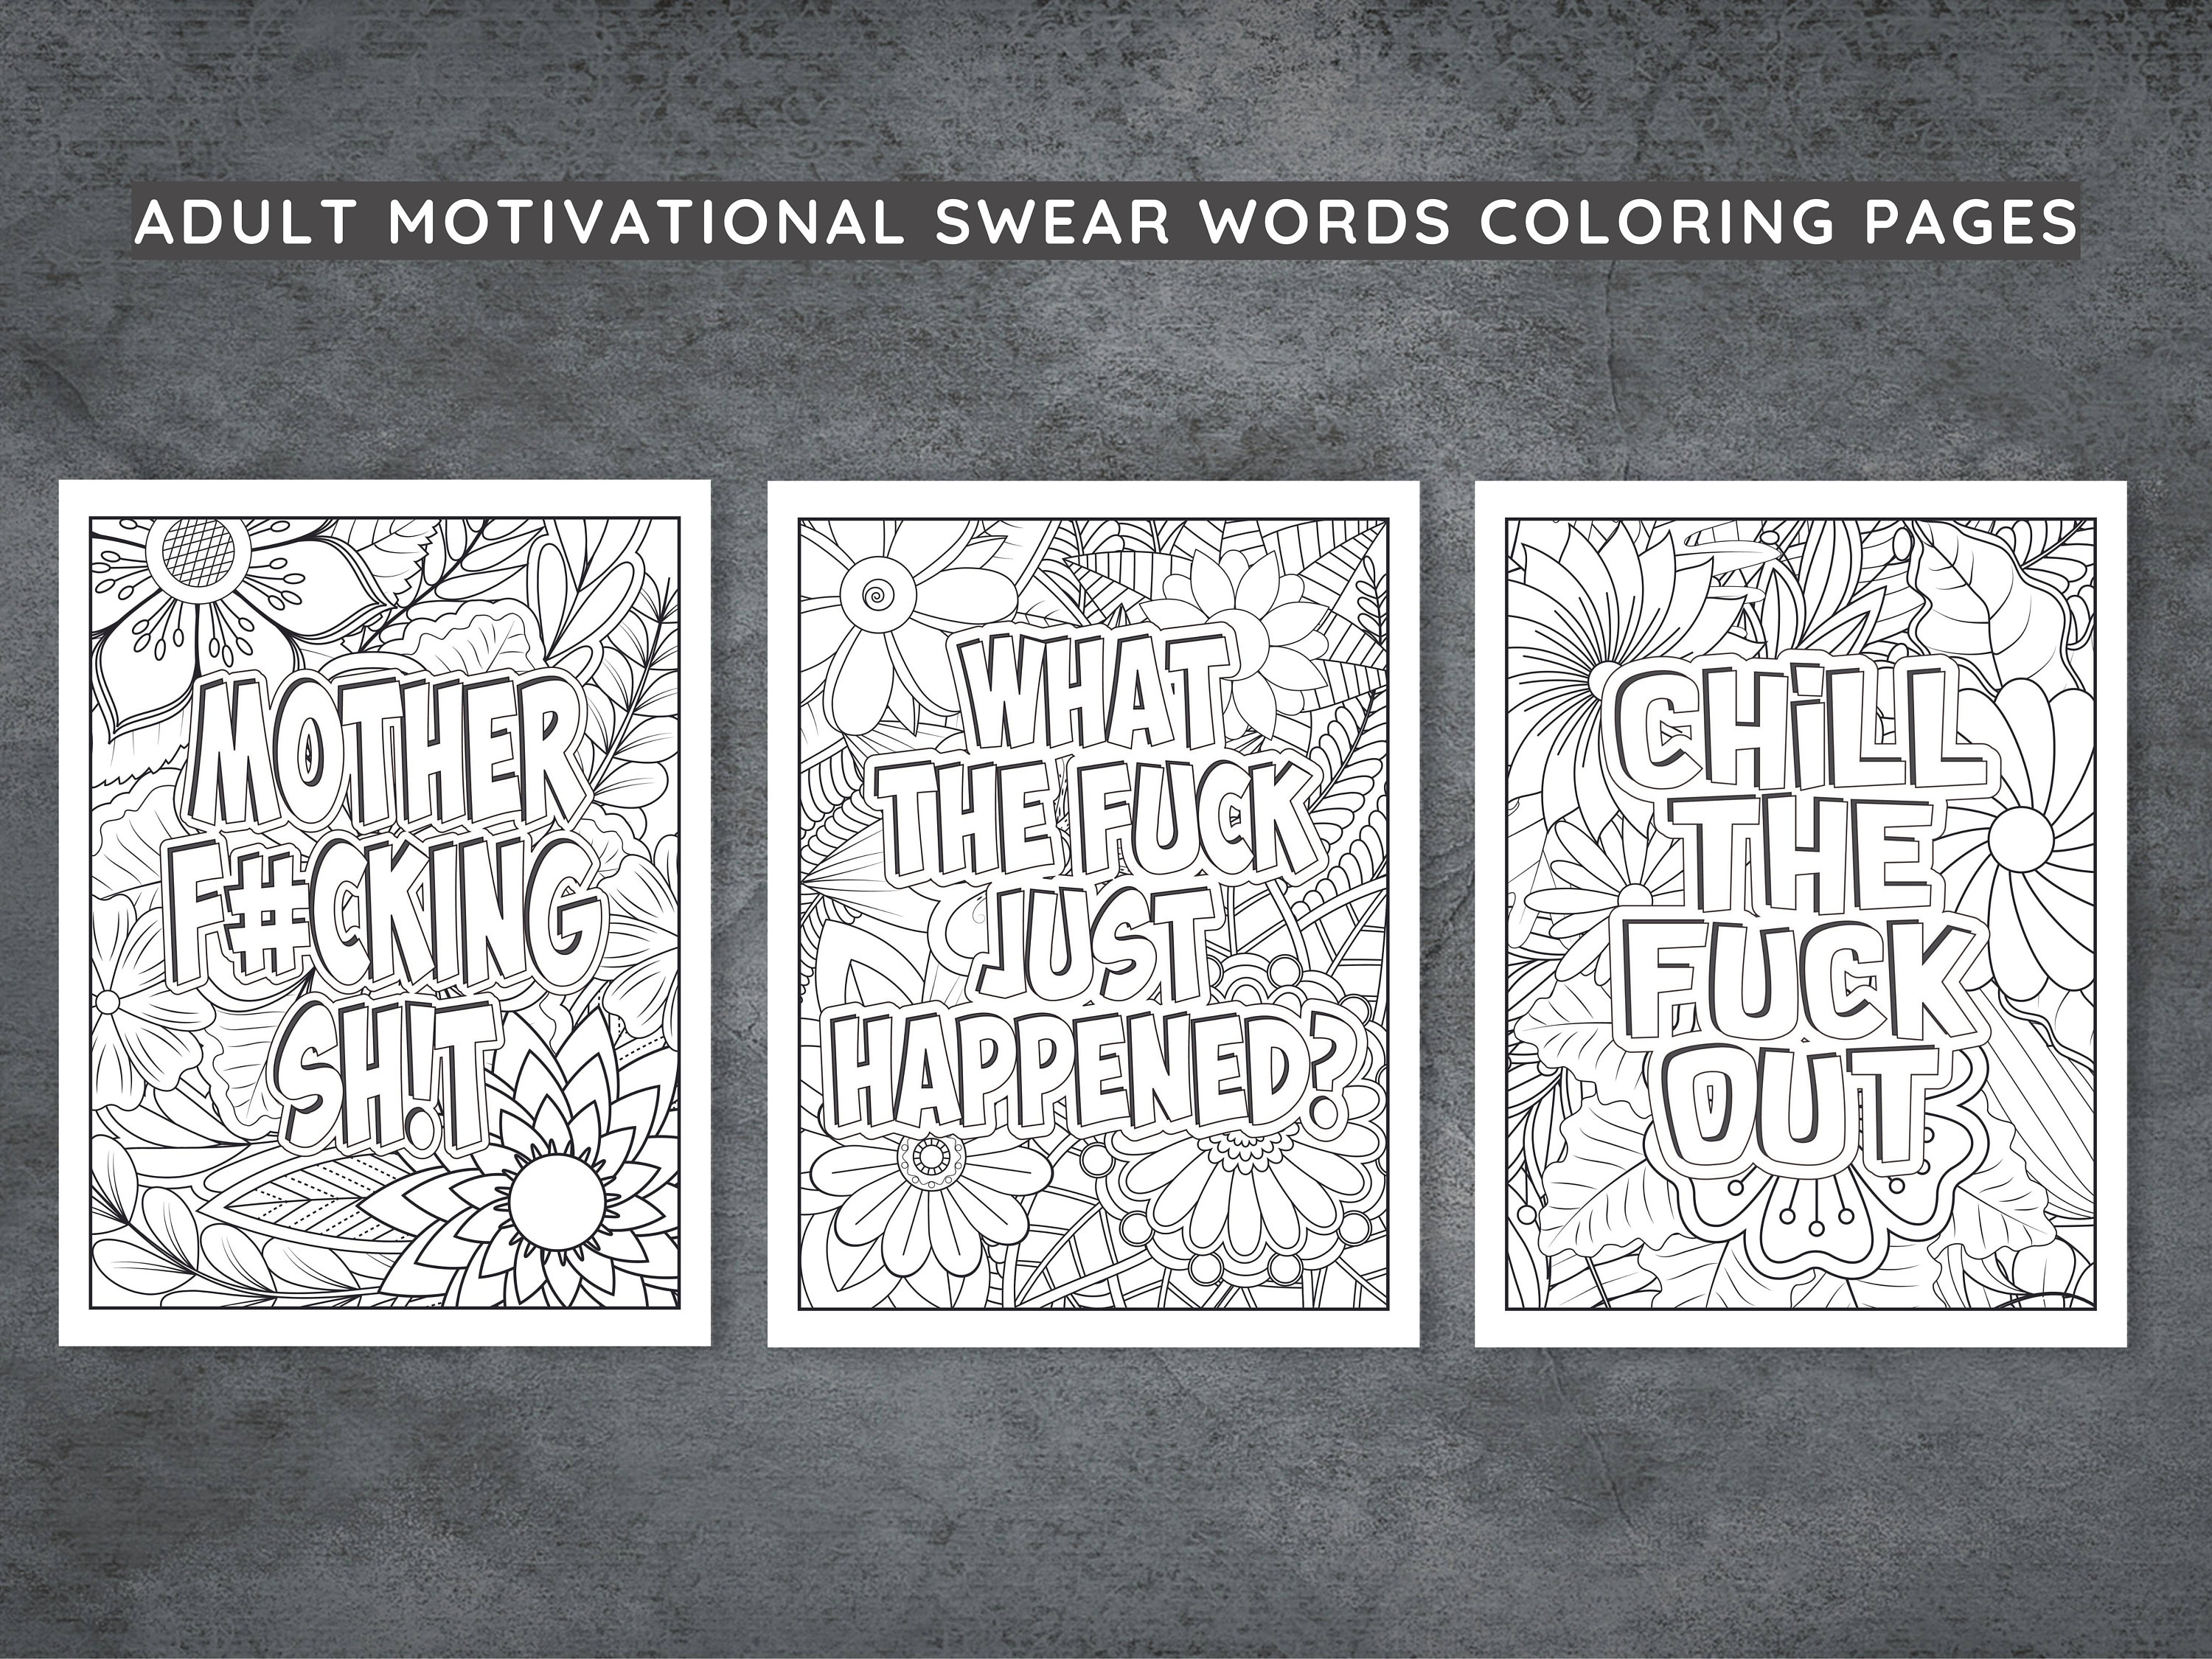 Printable Coloring Sheets, Swear Coloring Pages, Adult Coloring Pages  Printable, Swear Word Coloring Page, Funny Coloring Pages 